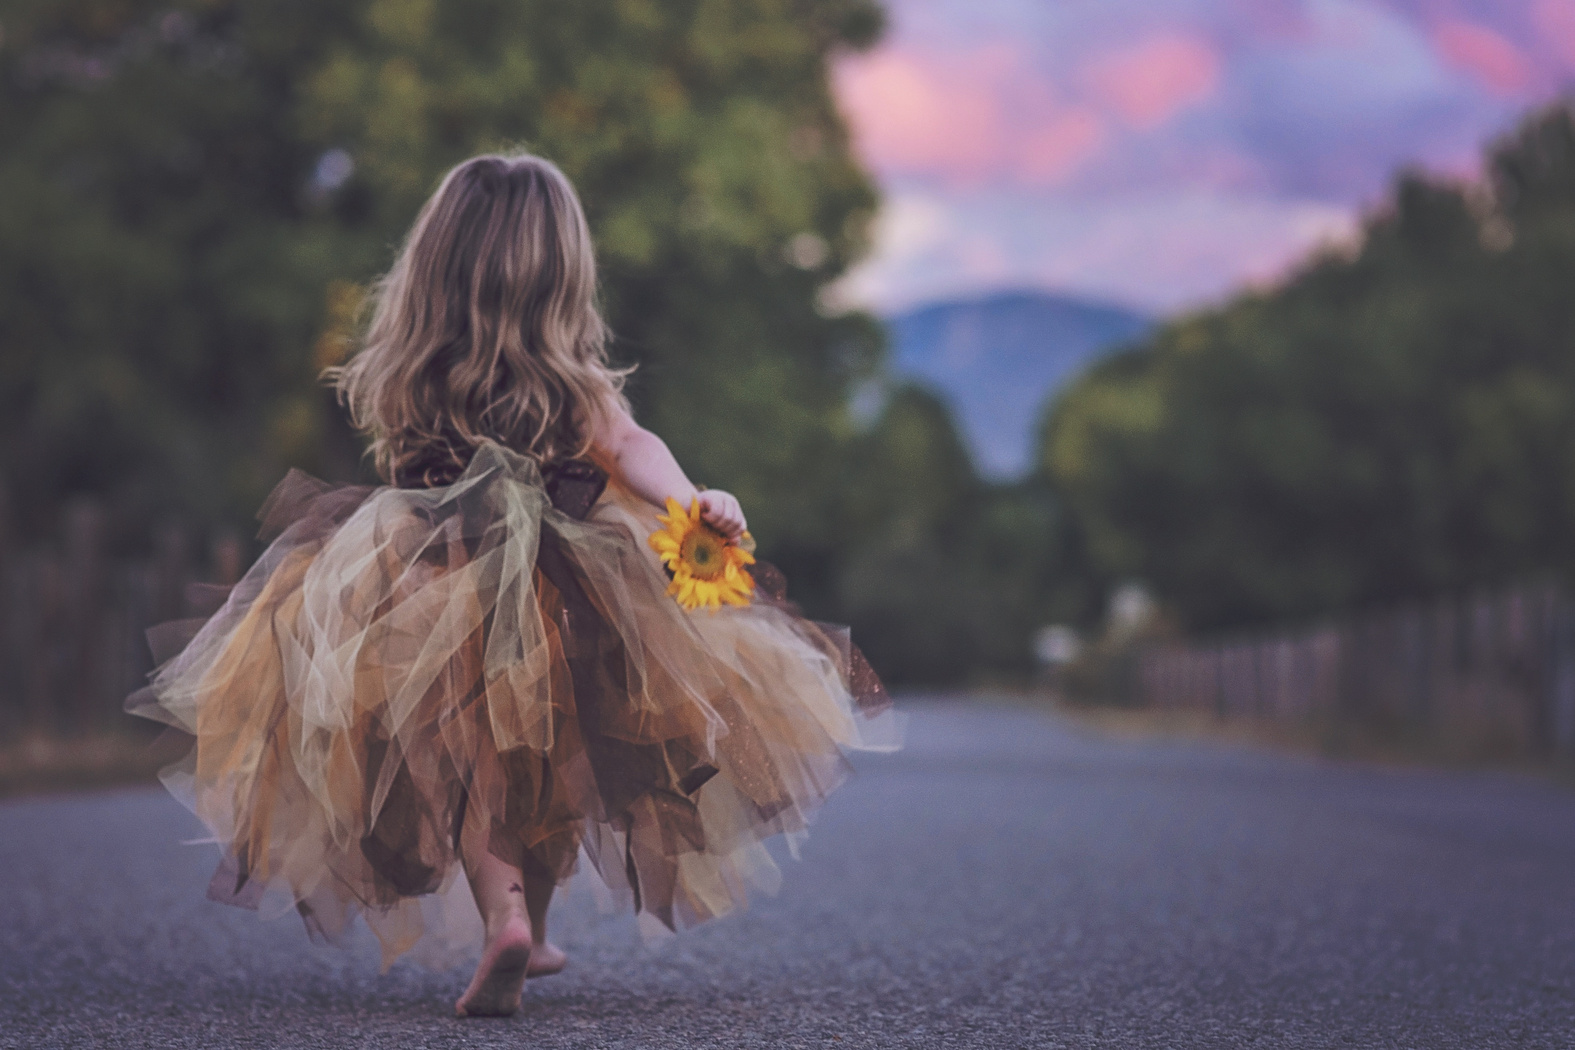 Girl in a Dress Holding a Sunflower